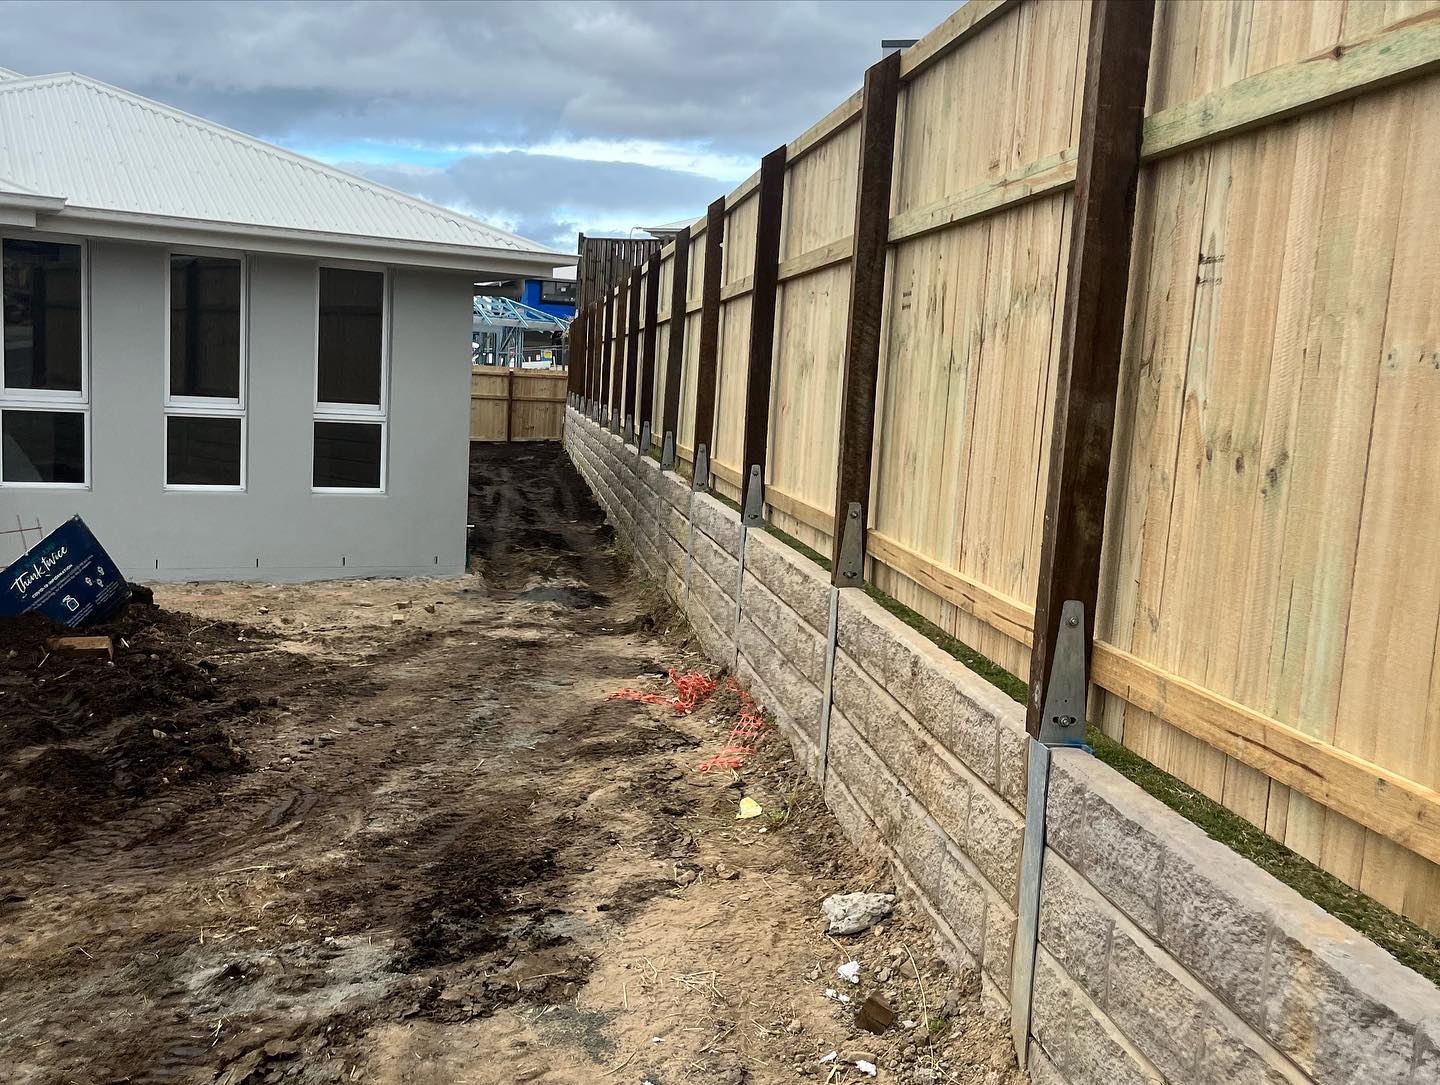 pine timber fencing with steel posts